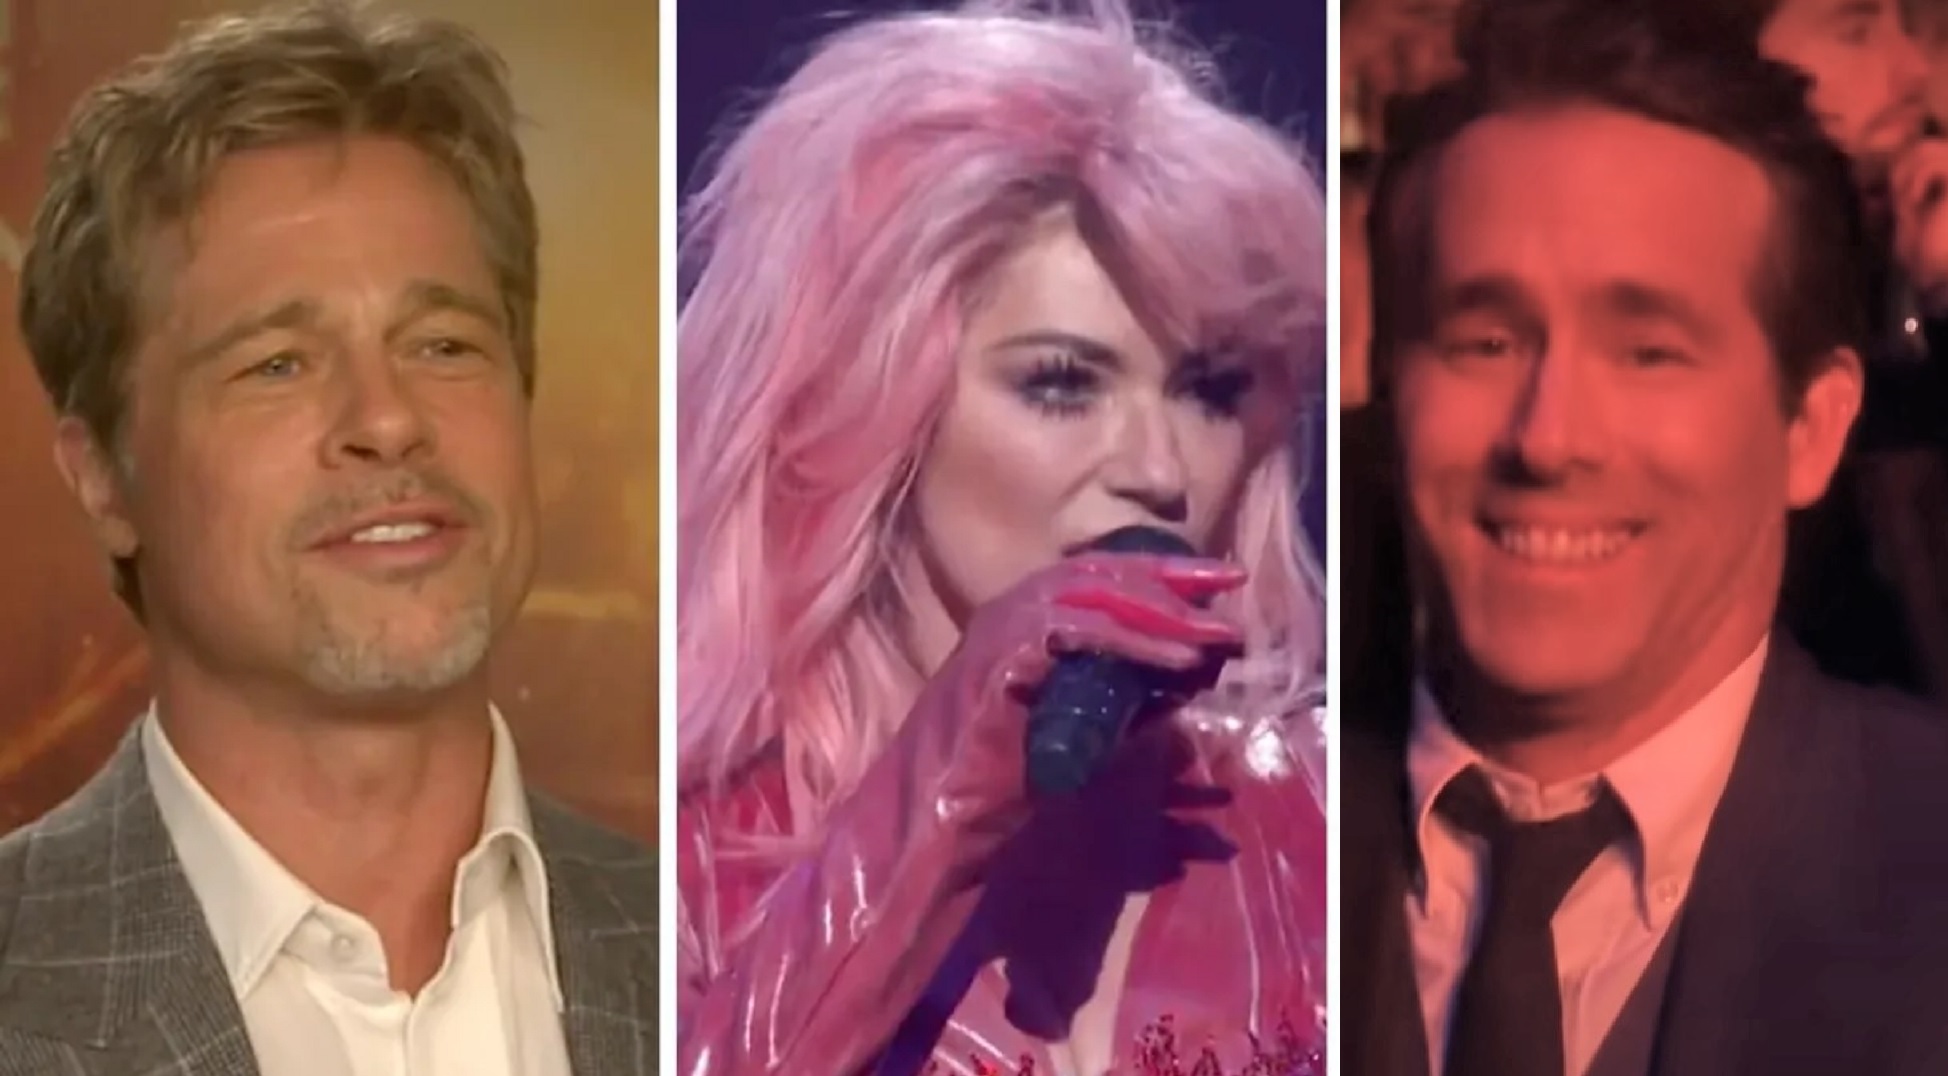 Here’s How Brad Pitt Reacted To Shania Twain Replacing His Name With Ryan Reynolds In Her Song ‘That Don’t Impress Me Much’